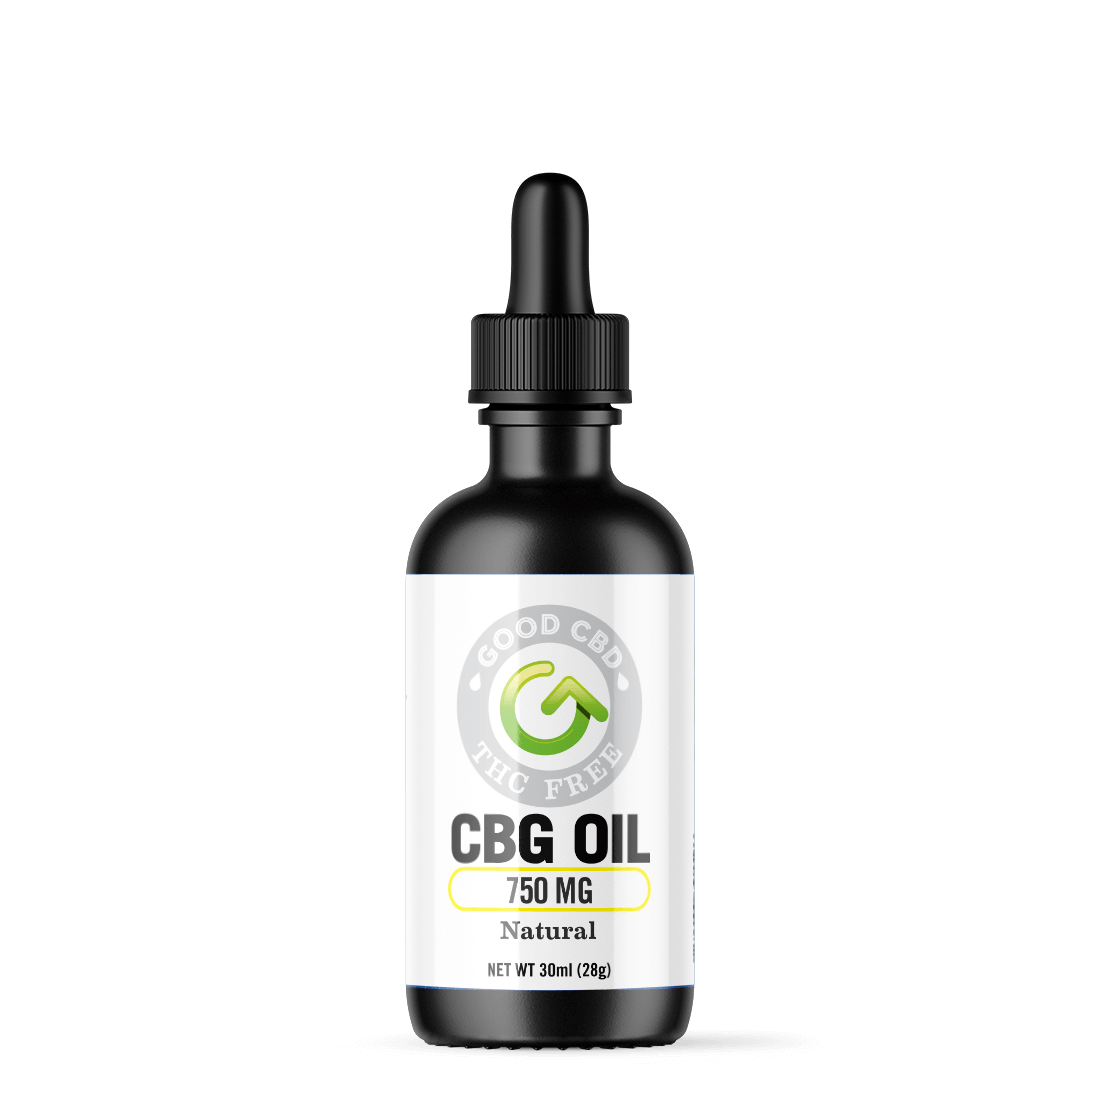 picture for the 30ml bottle of 750mg CBG oil from Good CBD.  